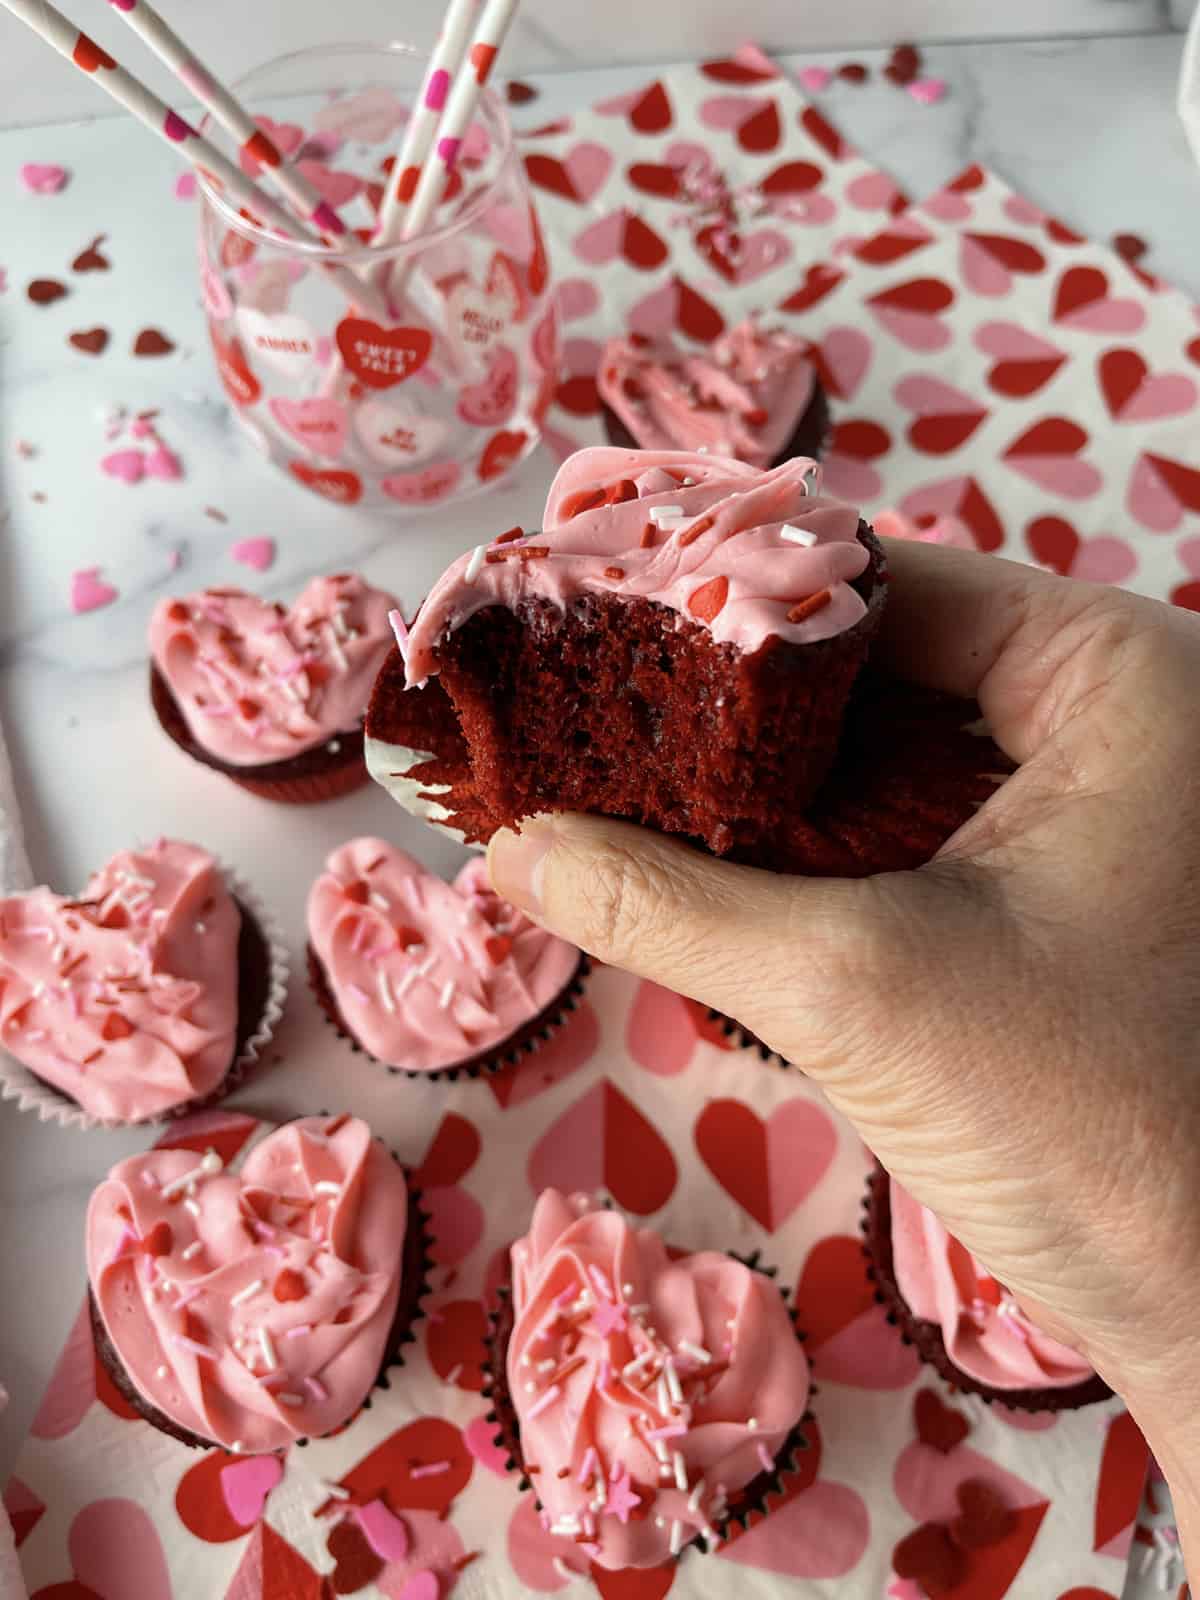 Red velvet cupcake with a bite taken out.